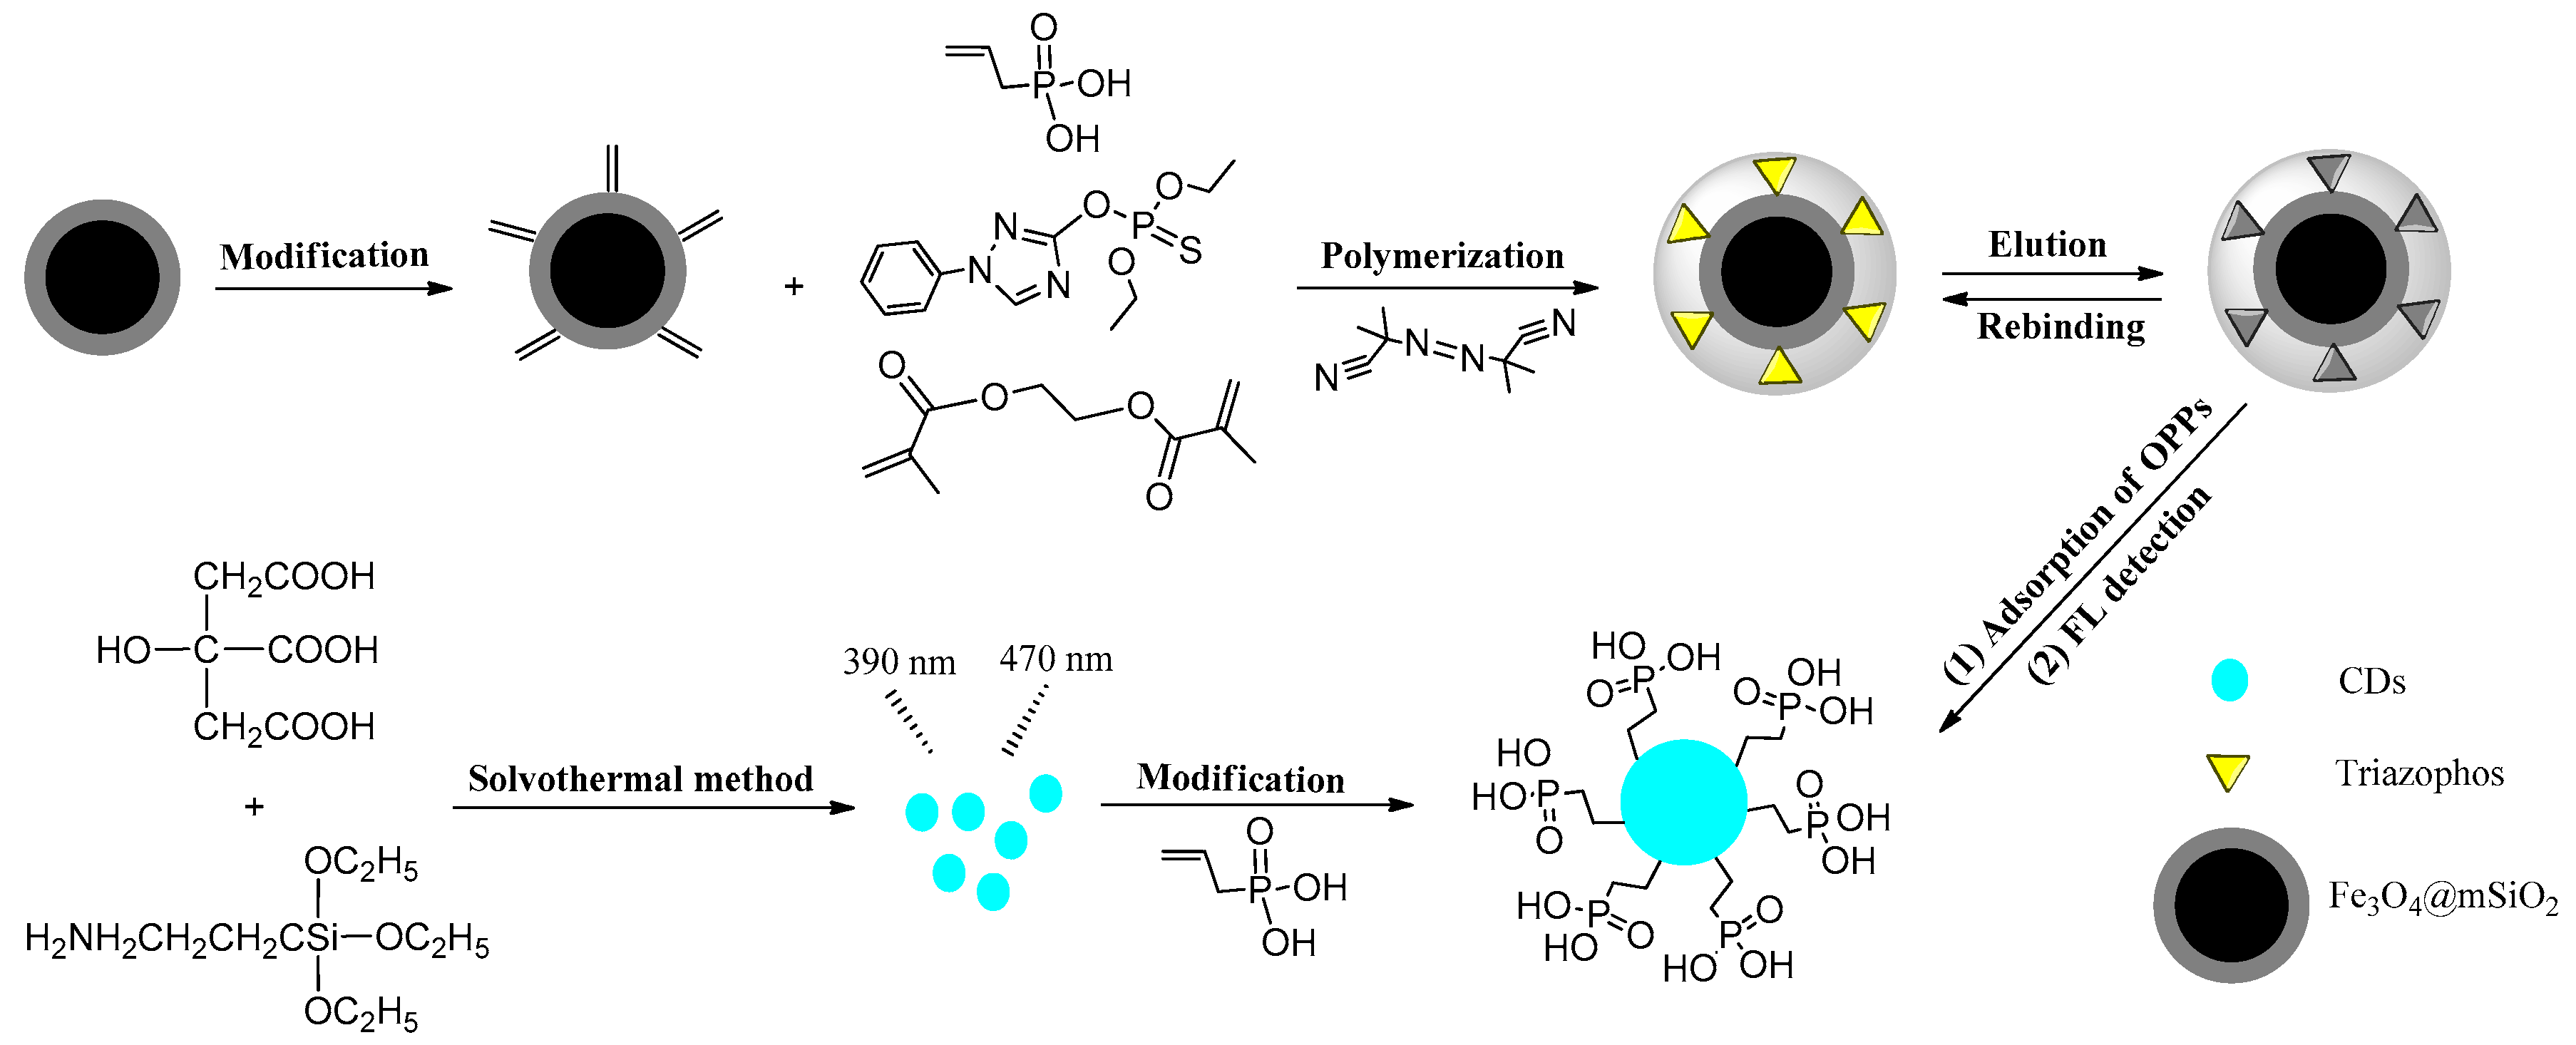 Polymers | Free Full-Text | Vinyl Phosphate-Functionalized, Magnetic,  Molecularly-Imprinted Polymeric Microspheres' Enrichment and Carbon Dots'  Fluorescence-Detection of Organophosphorus Pesticide Residues